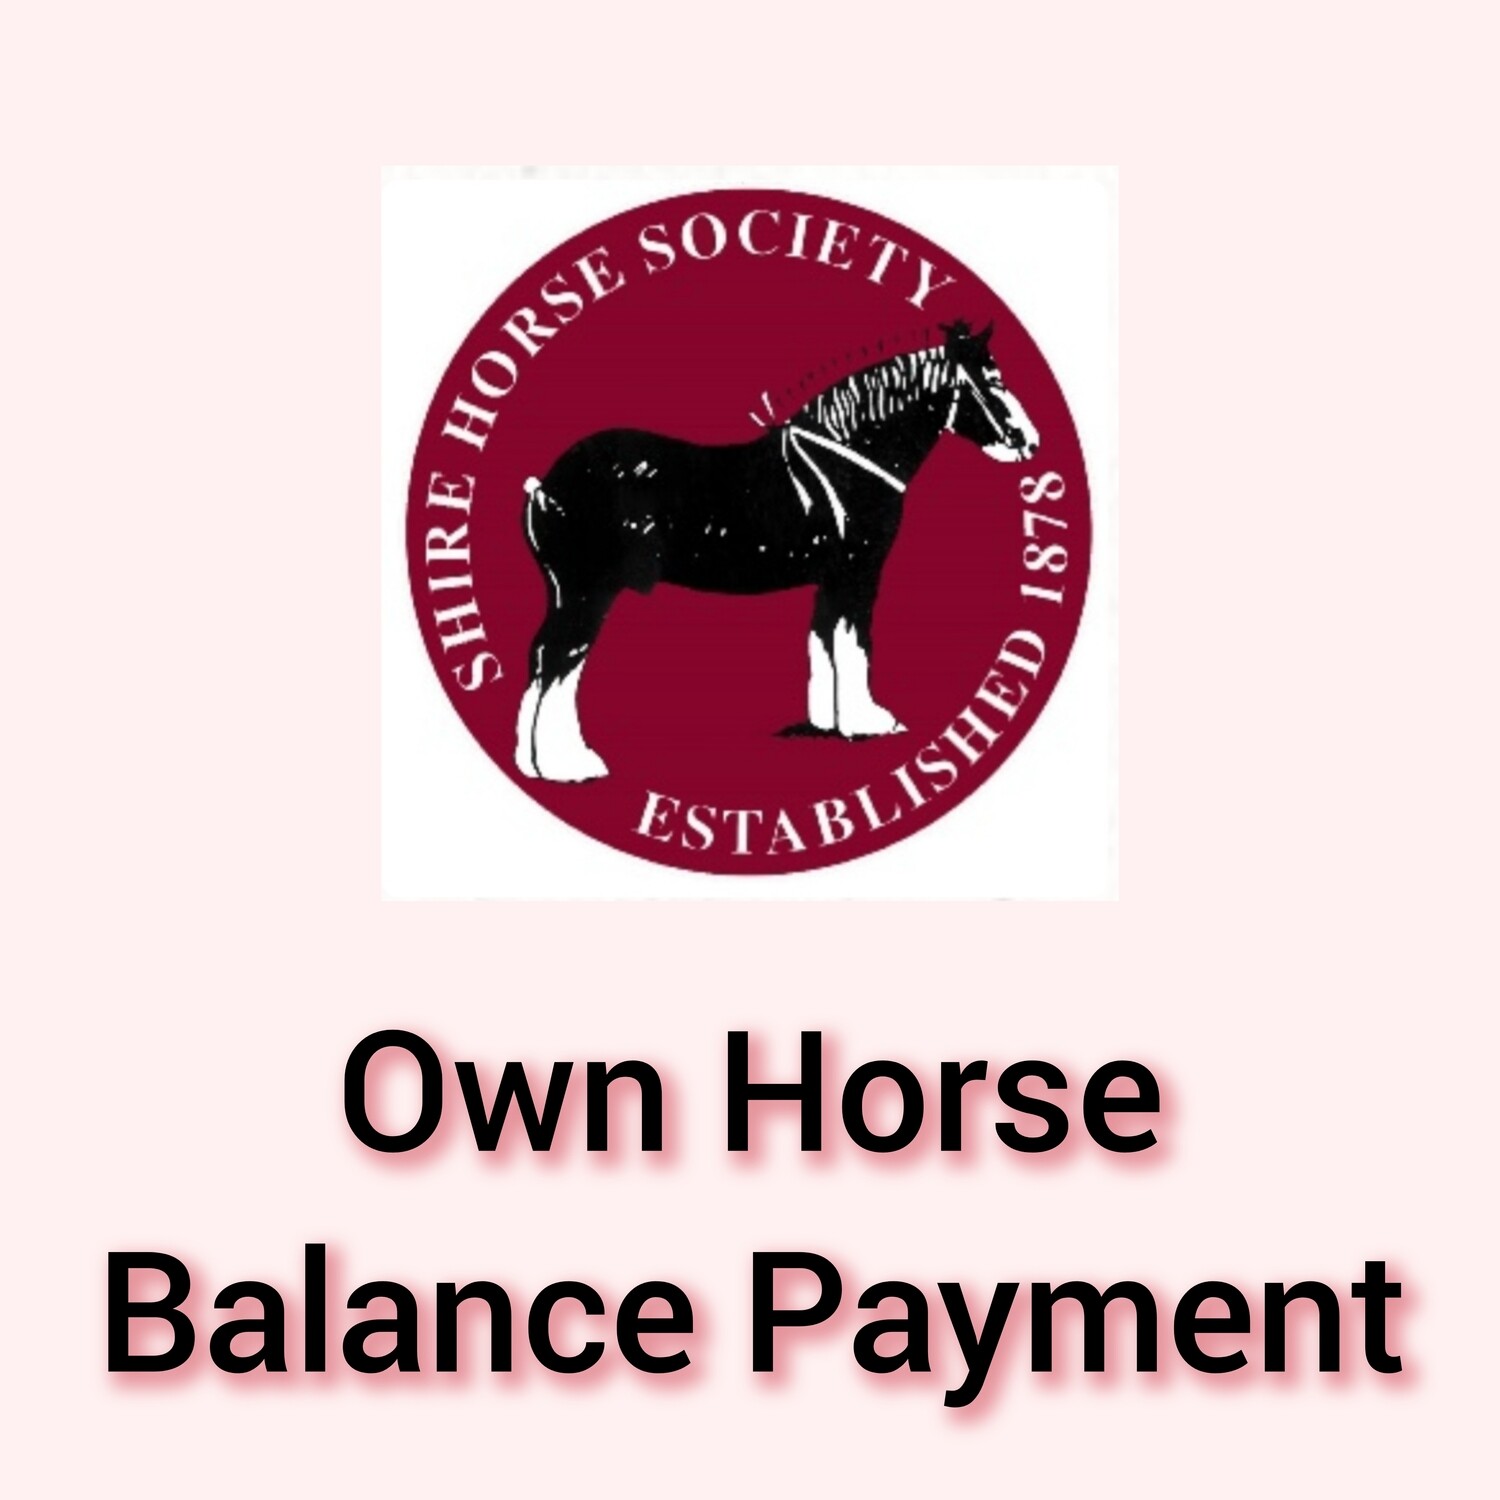 2. Heavy Horse Camp Own Horse Balance Payment